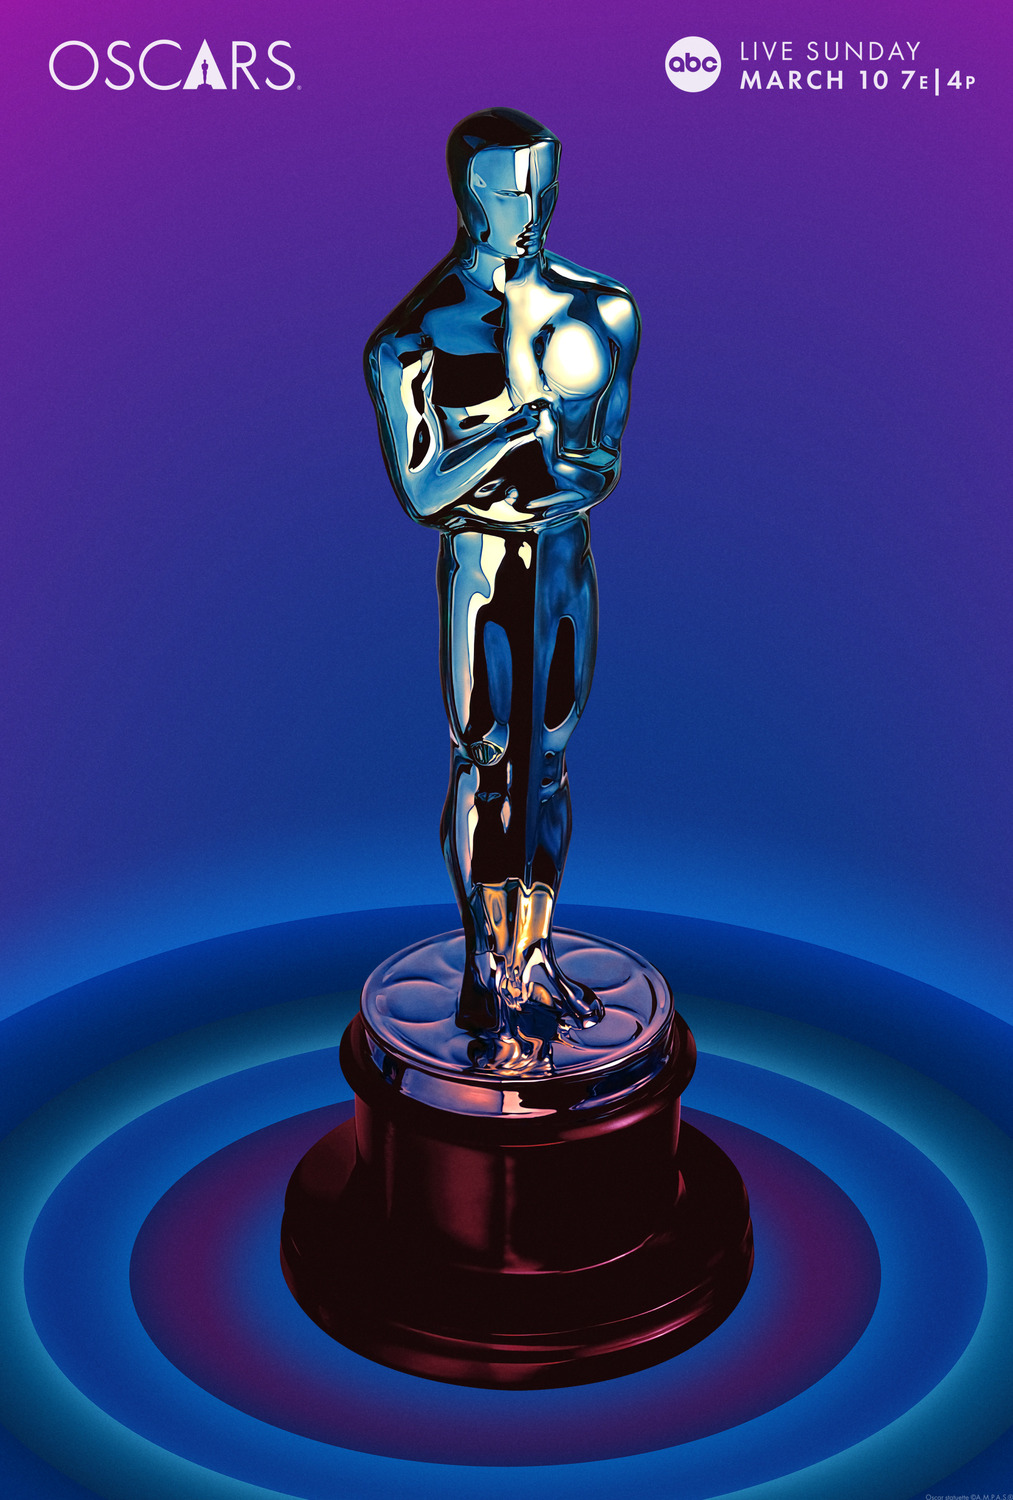 Extra Large TV Poster Image for The Oscars (#38 of 41)